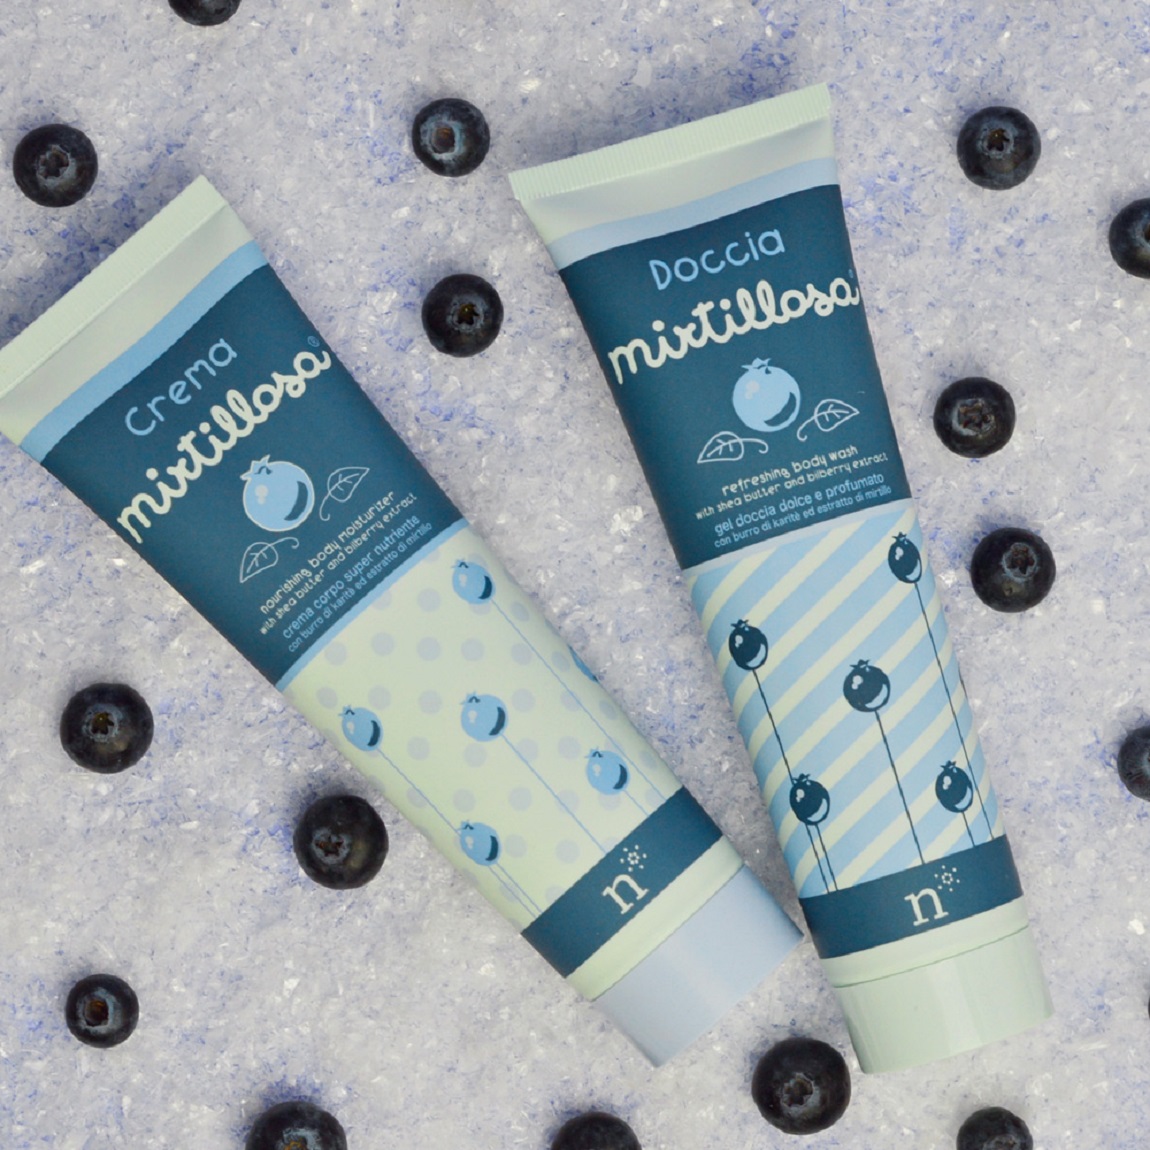 Blueberry cream and shower, when the skincare meets the Argan oil.